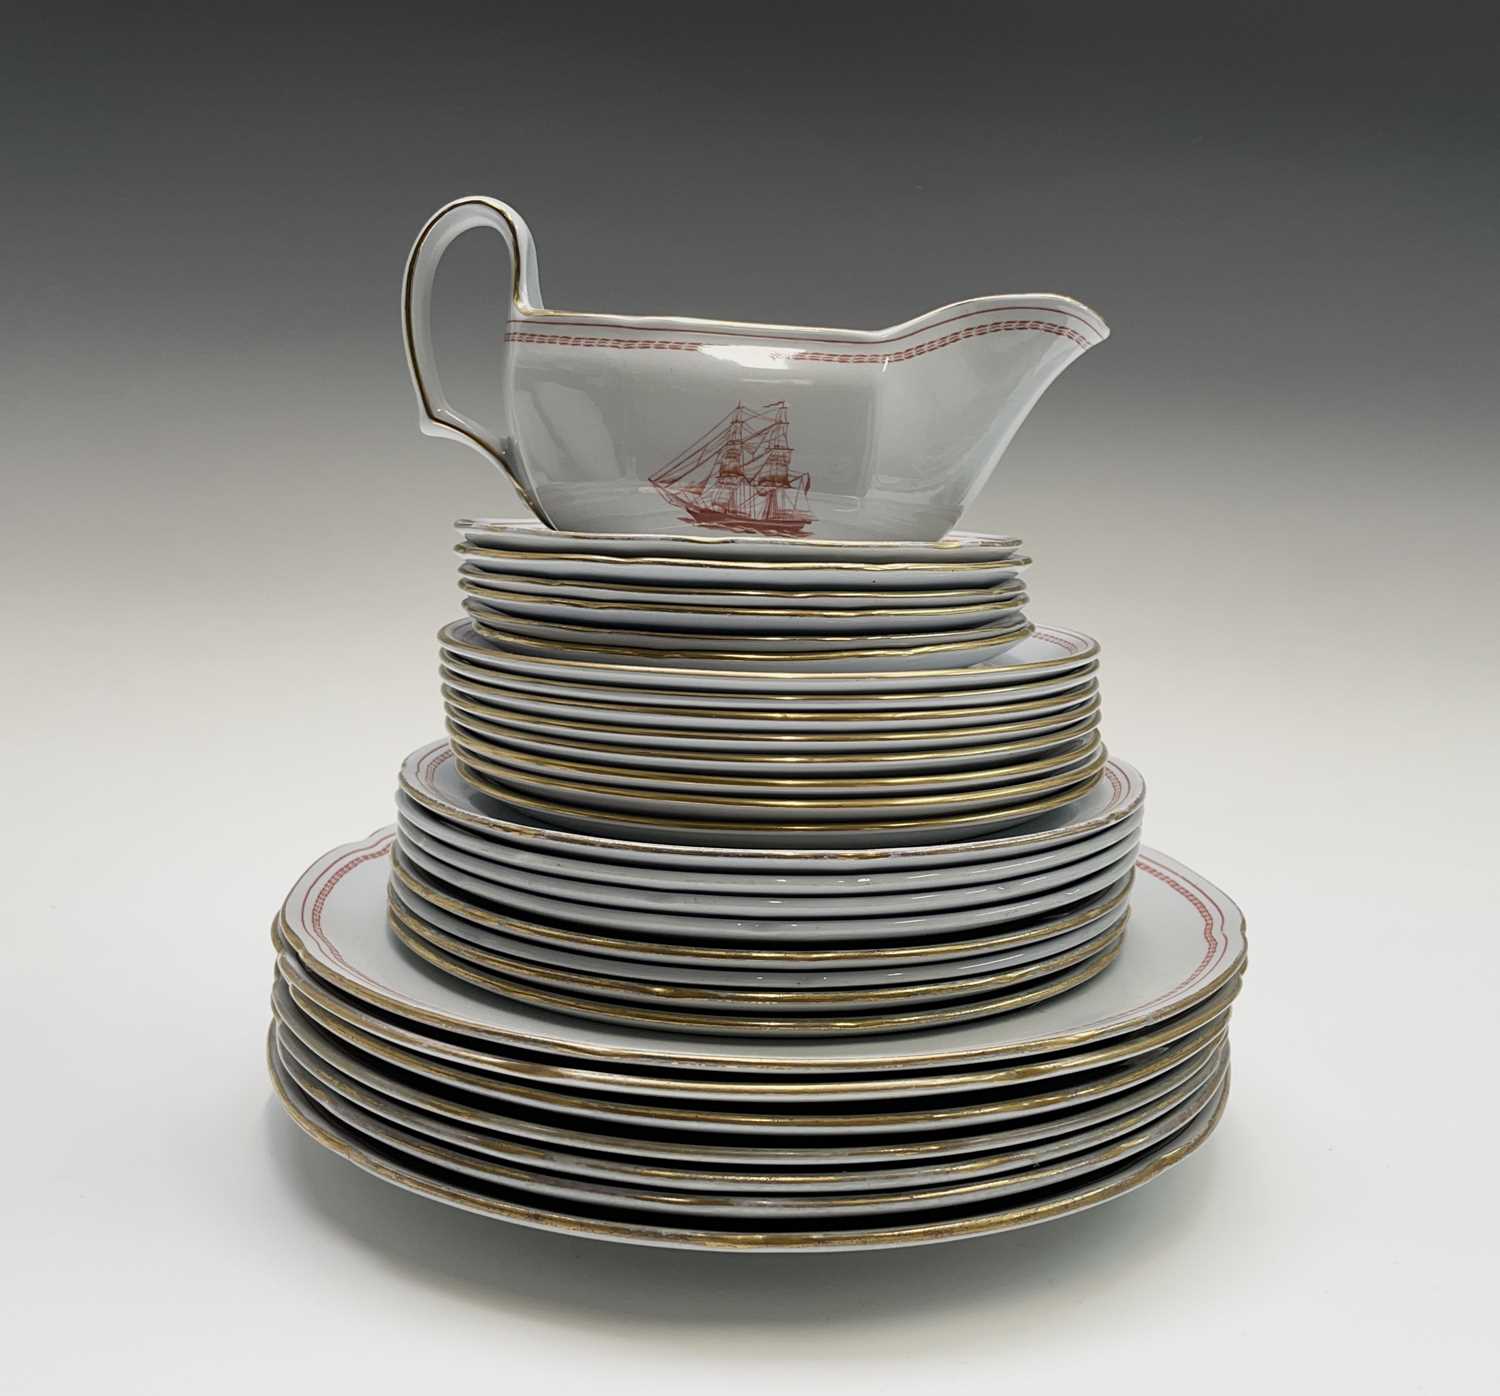 A Spode 'Trade Winds' pattern dinner service, comprising of a meat platter, tureen and cover, - Image 3 of 6